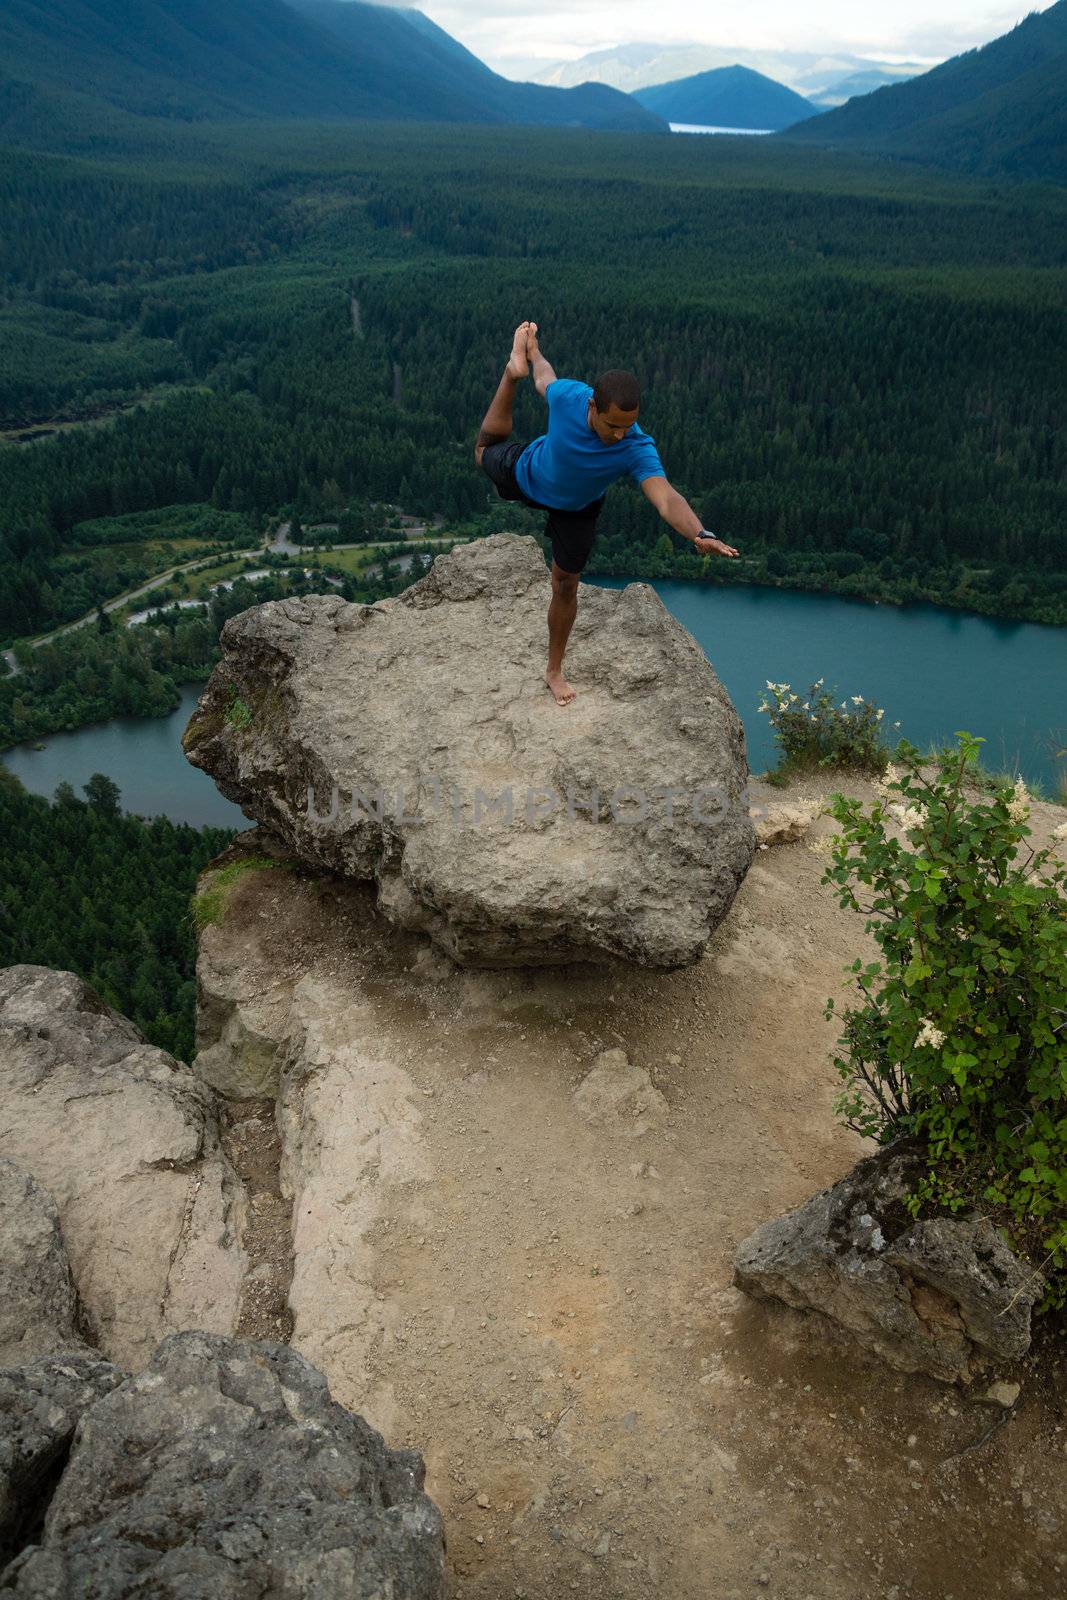 Young man in yoga pose on top of mountain with beautiful vista in background.